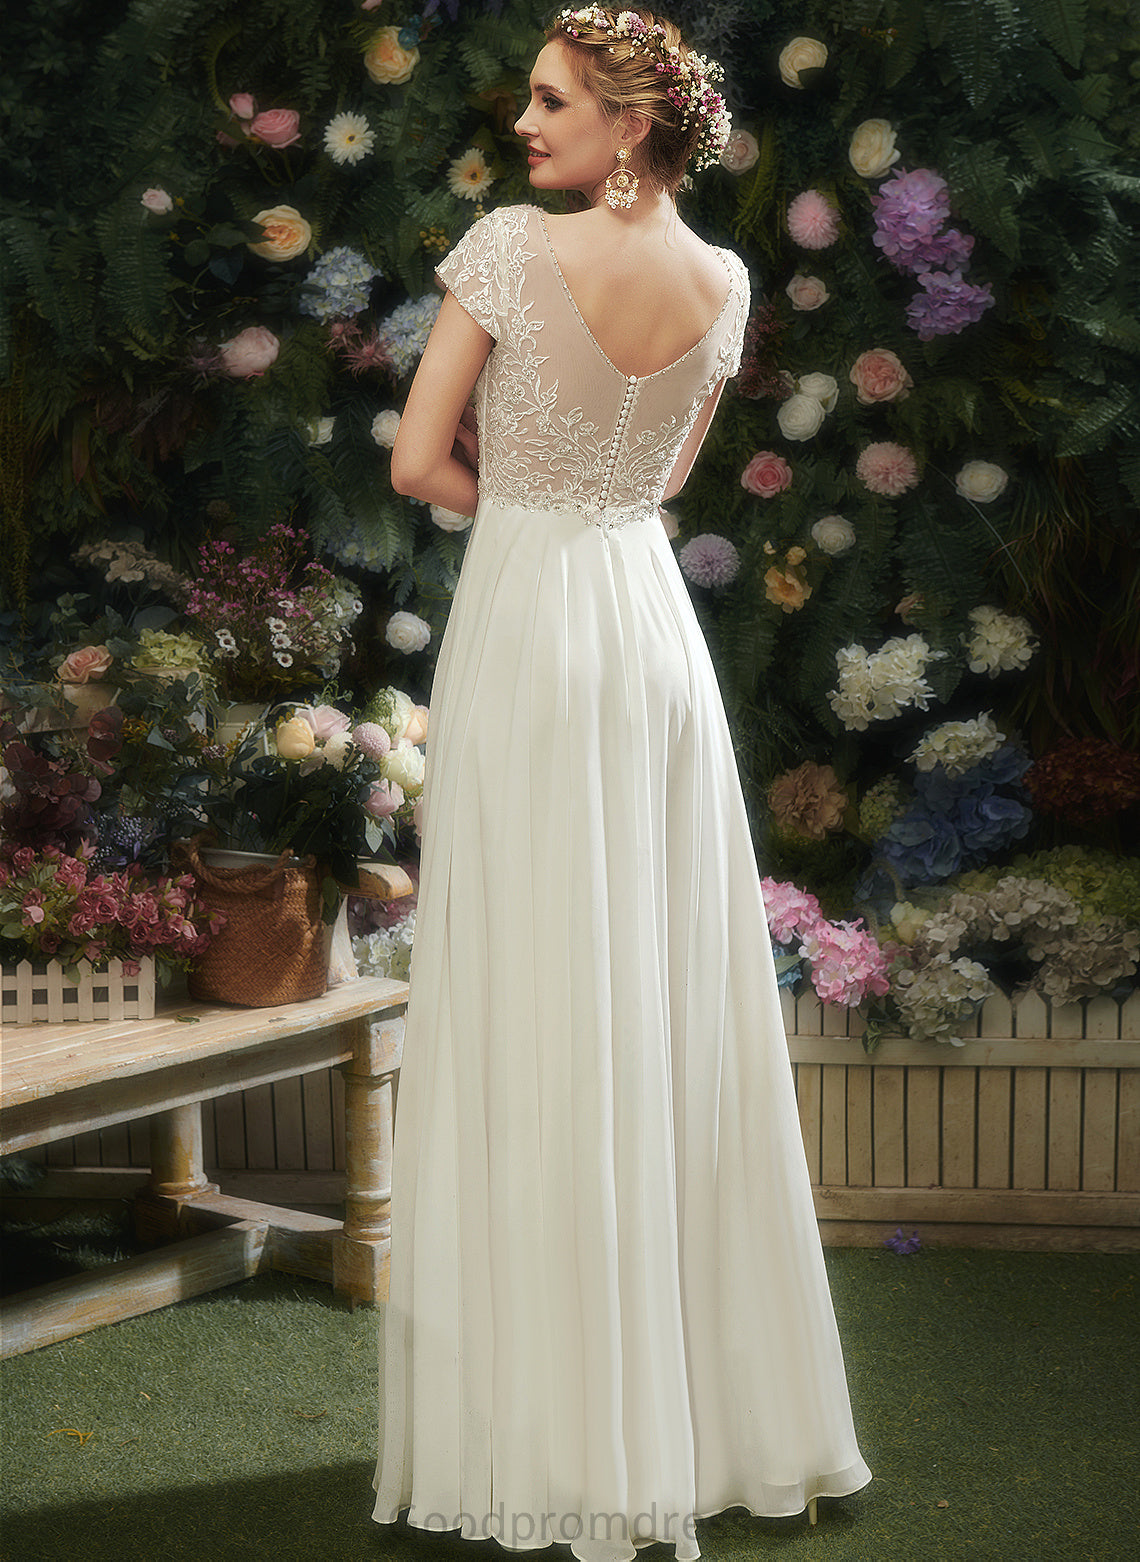 Lace Beading Wedding Dresses With Wedding Chiffon Dress Charlotte Sequins V-neck Floor-Length A-Line